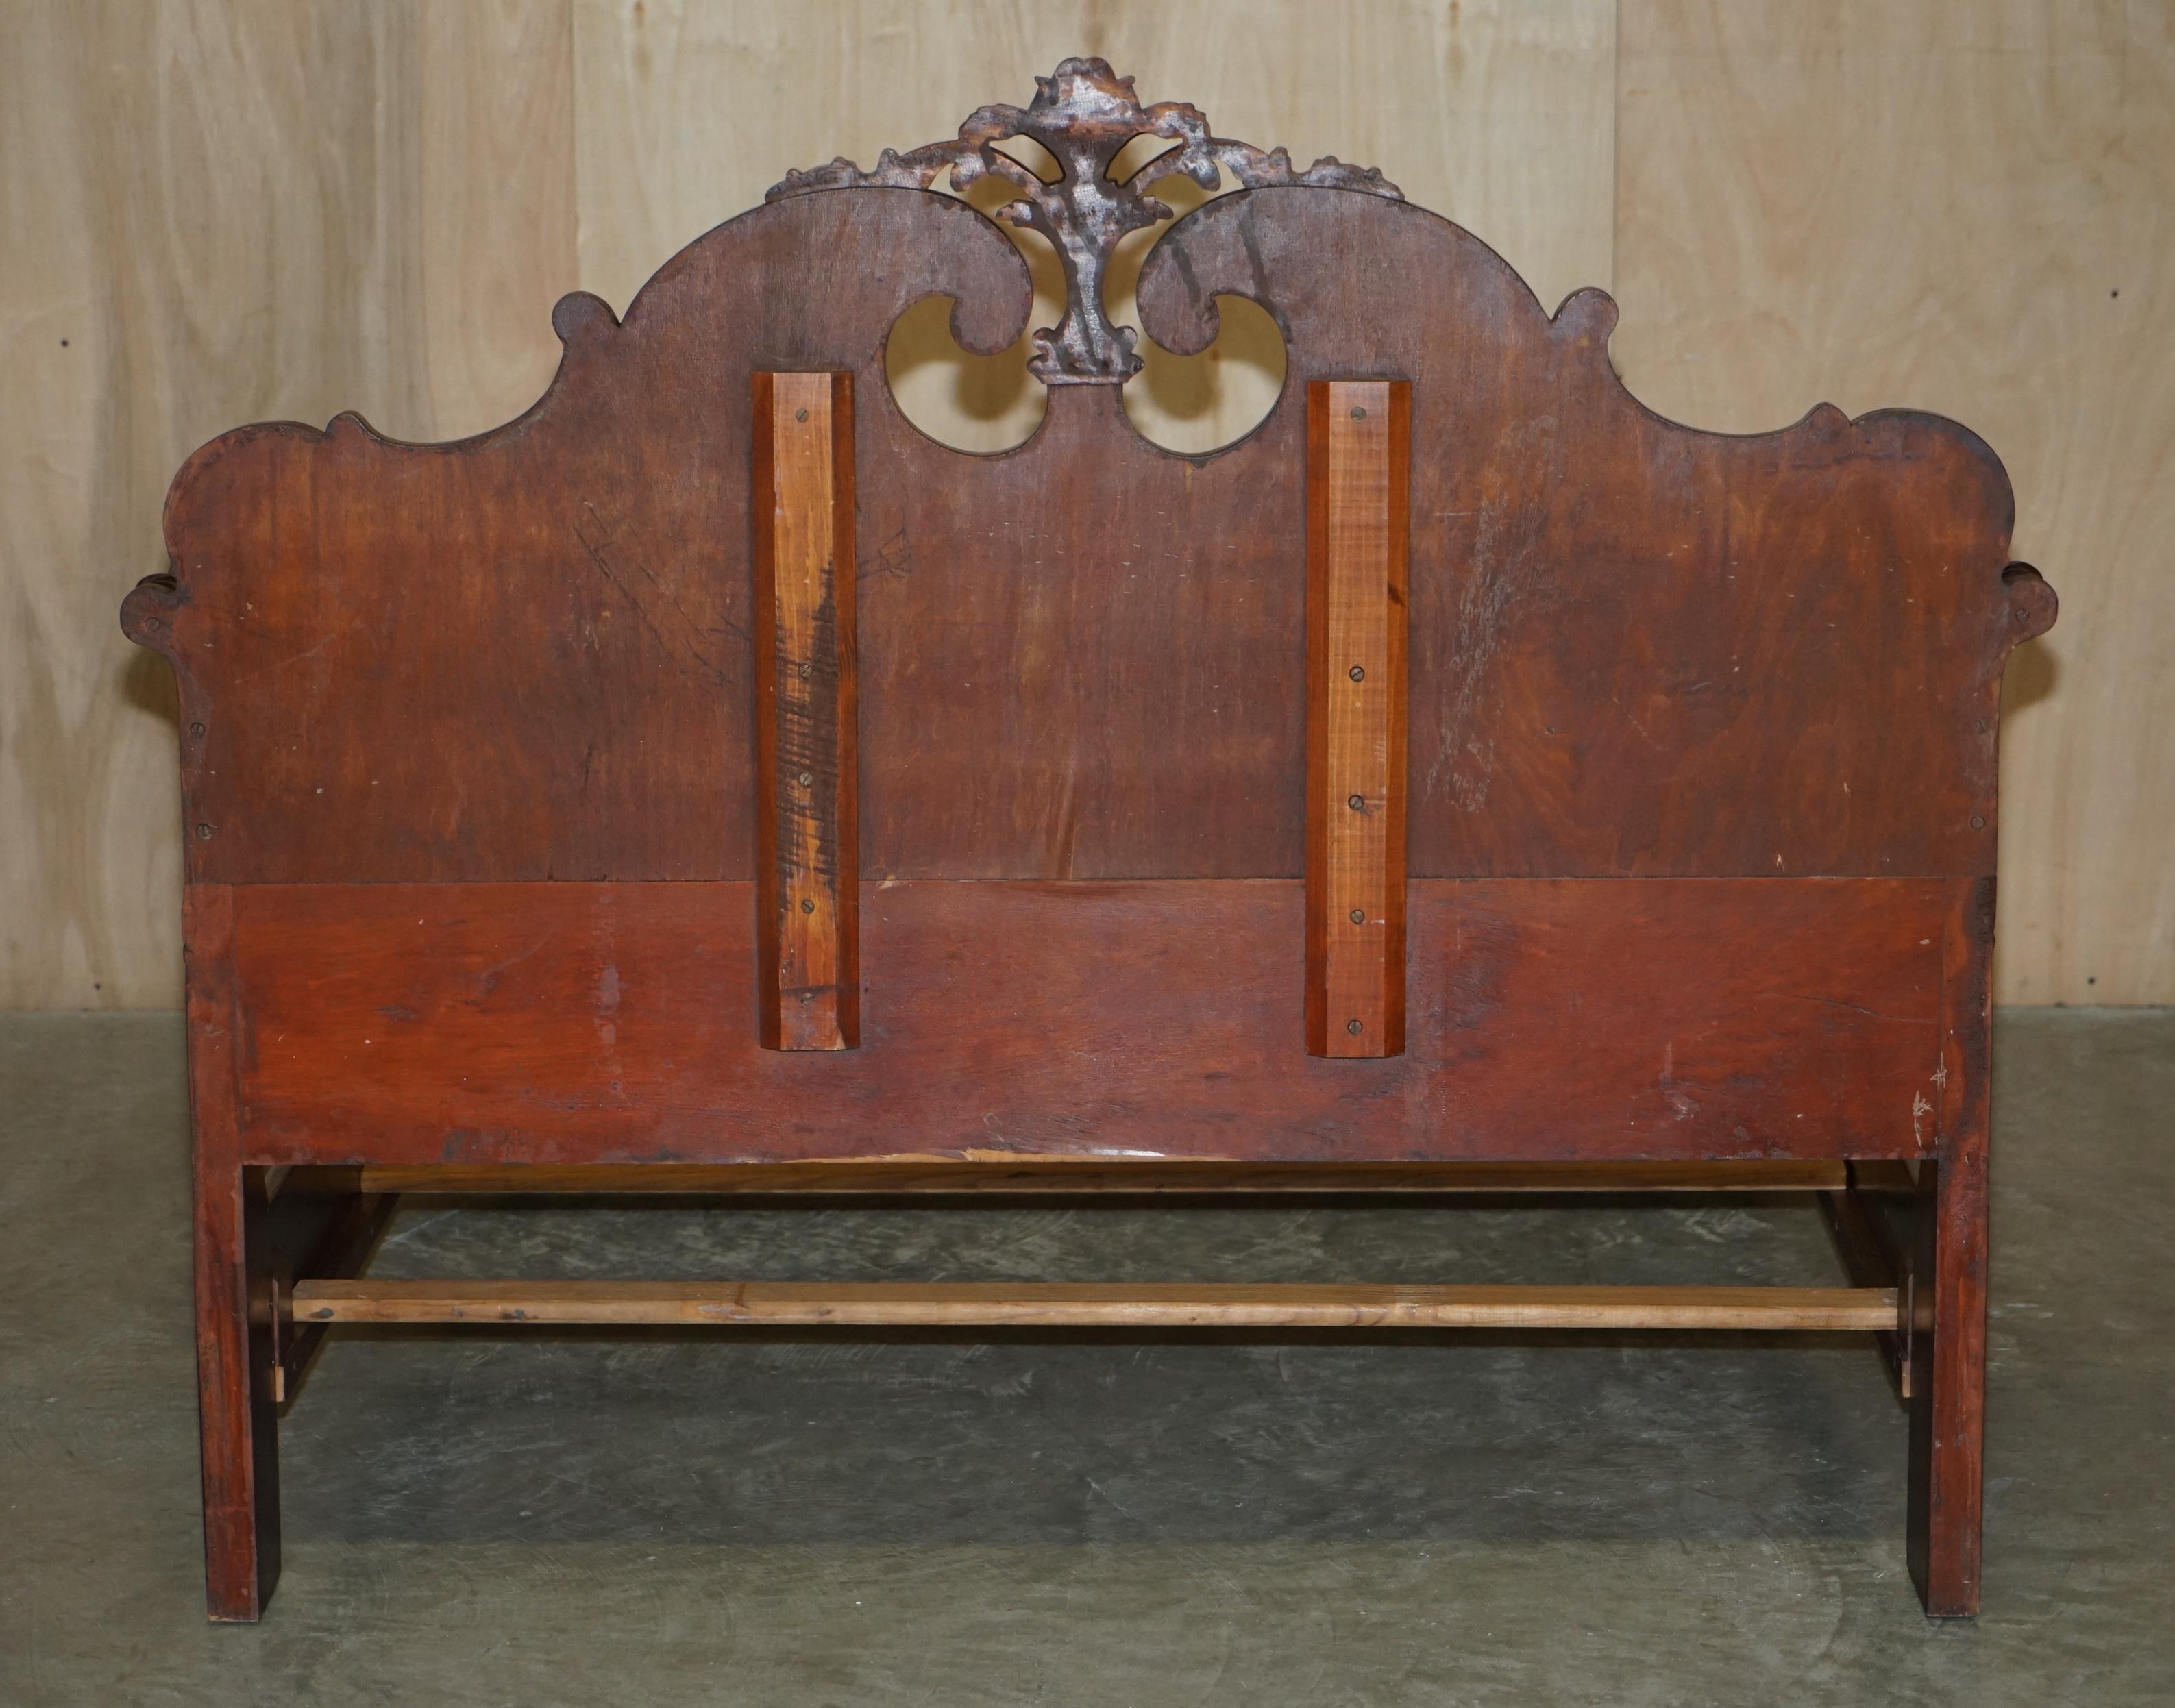 EXQUISITELY CARVED ANTIQUE ViCTORIAN CIRCA 1880 FLAMED HARDWOOD DOUBLE BED FRAME For Sale 5